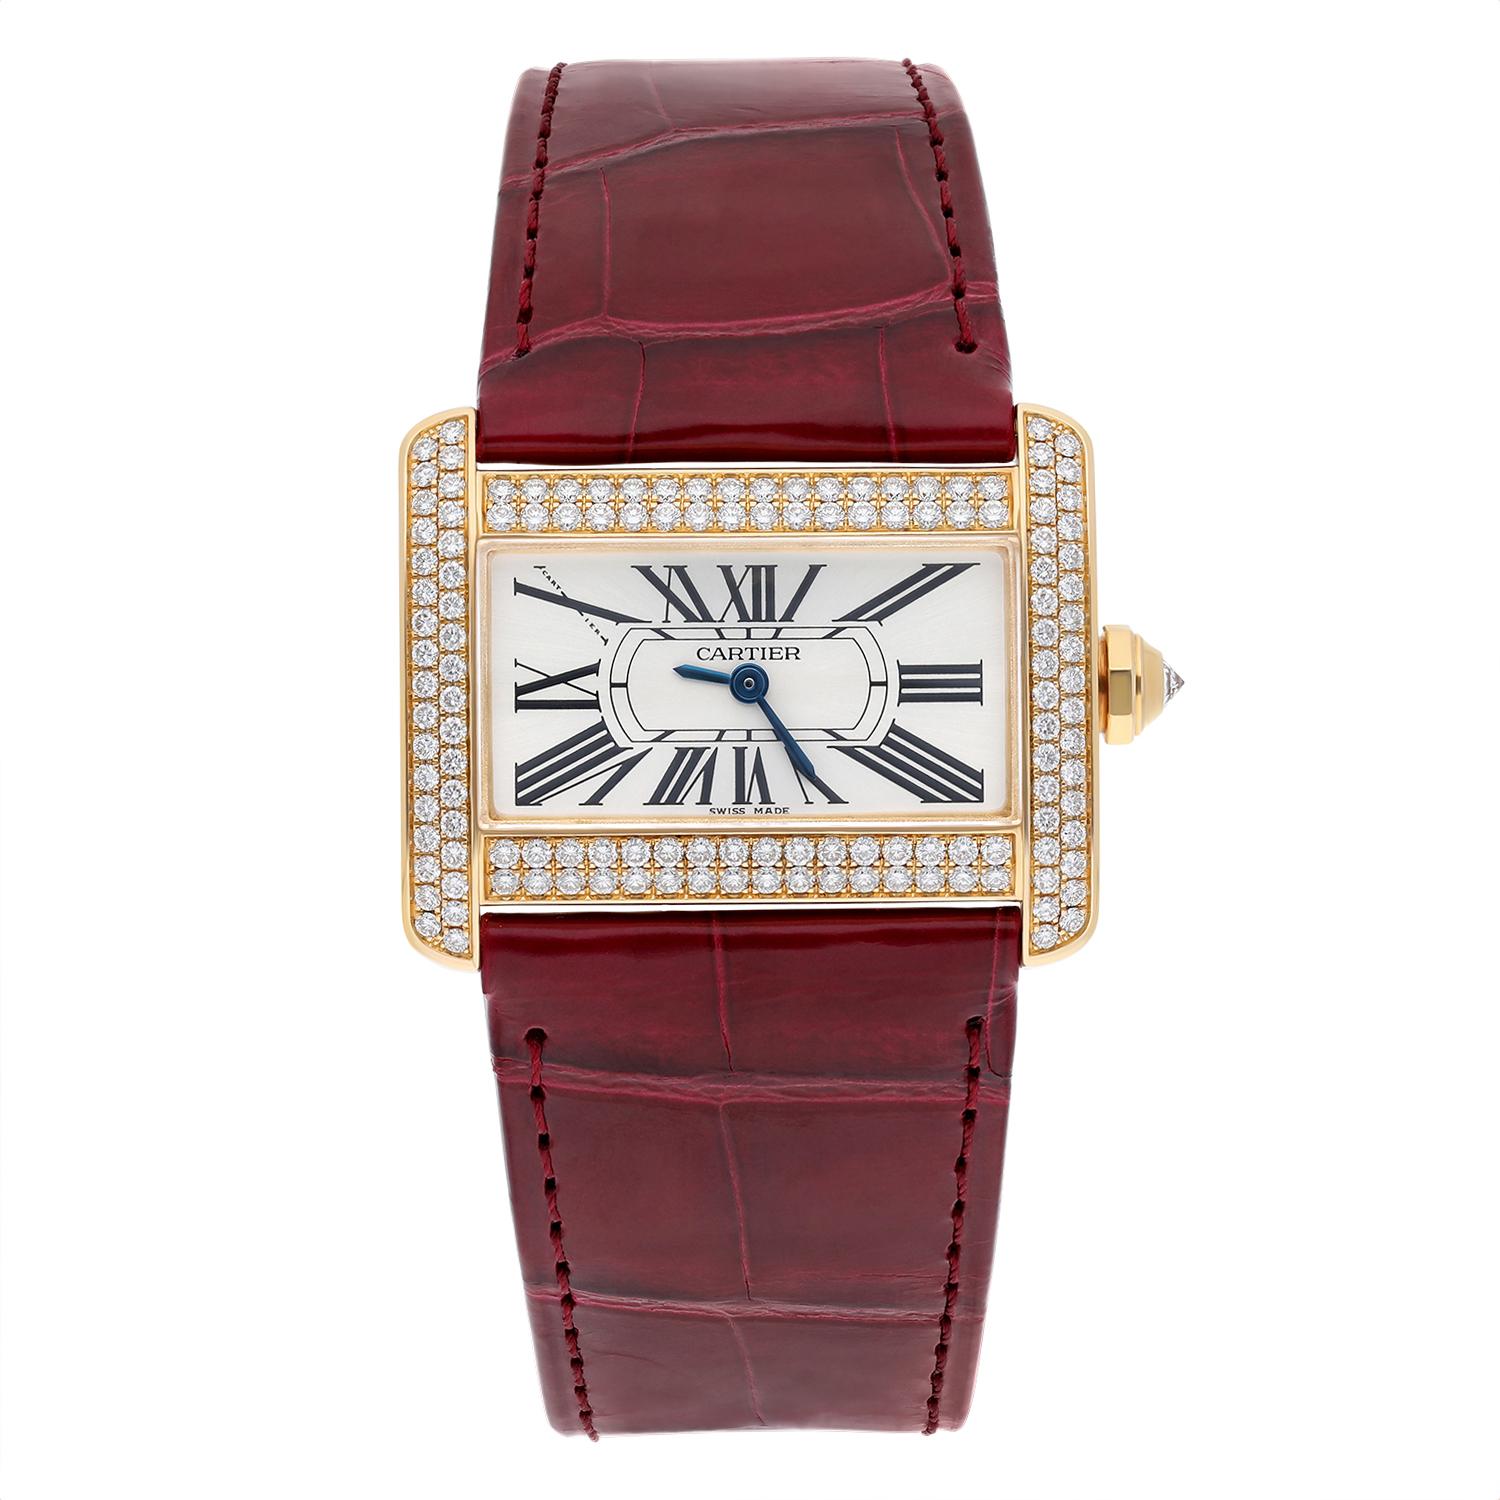 Elevate your style with this exquisite Cartier Tank Divan Mini wristwatch, crafted from yellow gold with a two-piece leather strap in a stunning red hue. The watch features roman numerals on a silver dial, with a factory diamond-encrusted bezel